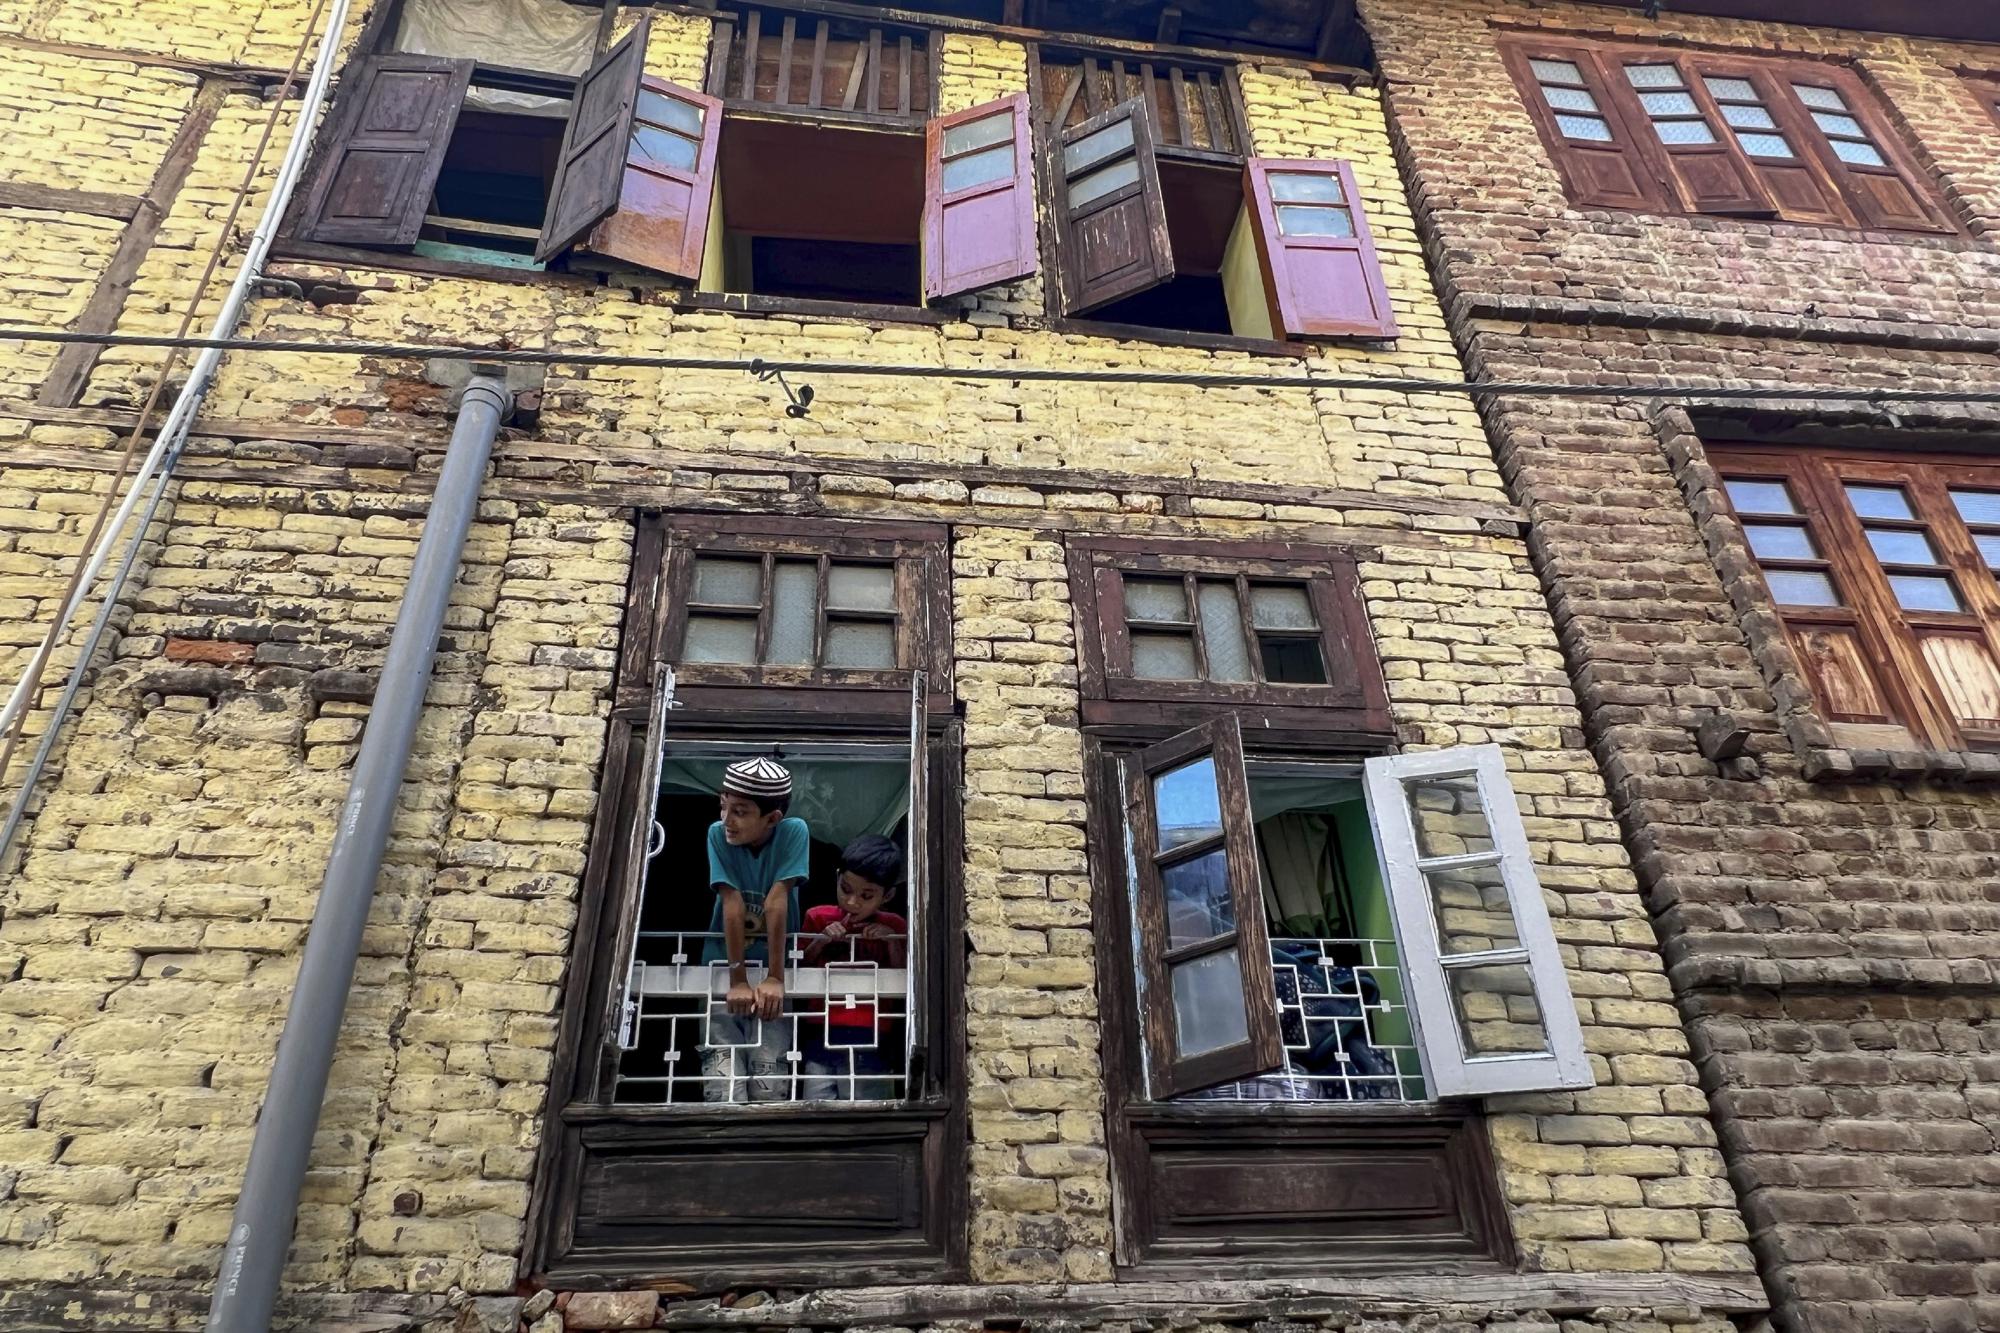 Tanzeel Ahmed, left, and Umar Ahmed, the children of migrant workers from the state of Uttar Pradesh, look out from the window of their rented home in Srinagar, Indian controlled Kashmir, in this Tuesday, June14, 2022 iPhone photo. "The photos that are now shot on the latest phones feel like digital art more than photographs. What you see with the naked eye is not what you get on your screen. And that for me is very unsettling," wrote Yasin. (AP Photo/Dar Yasin)